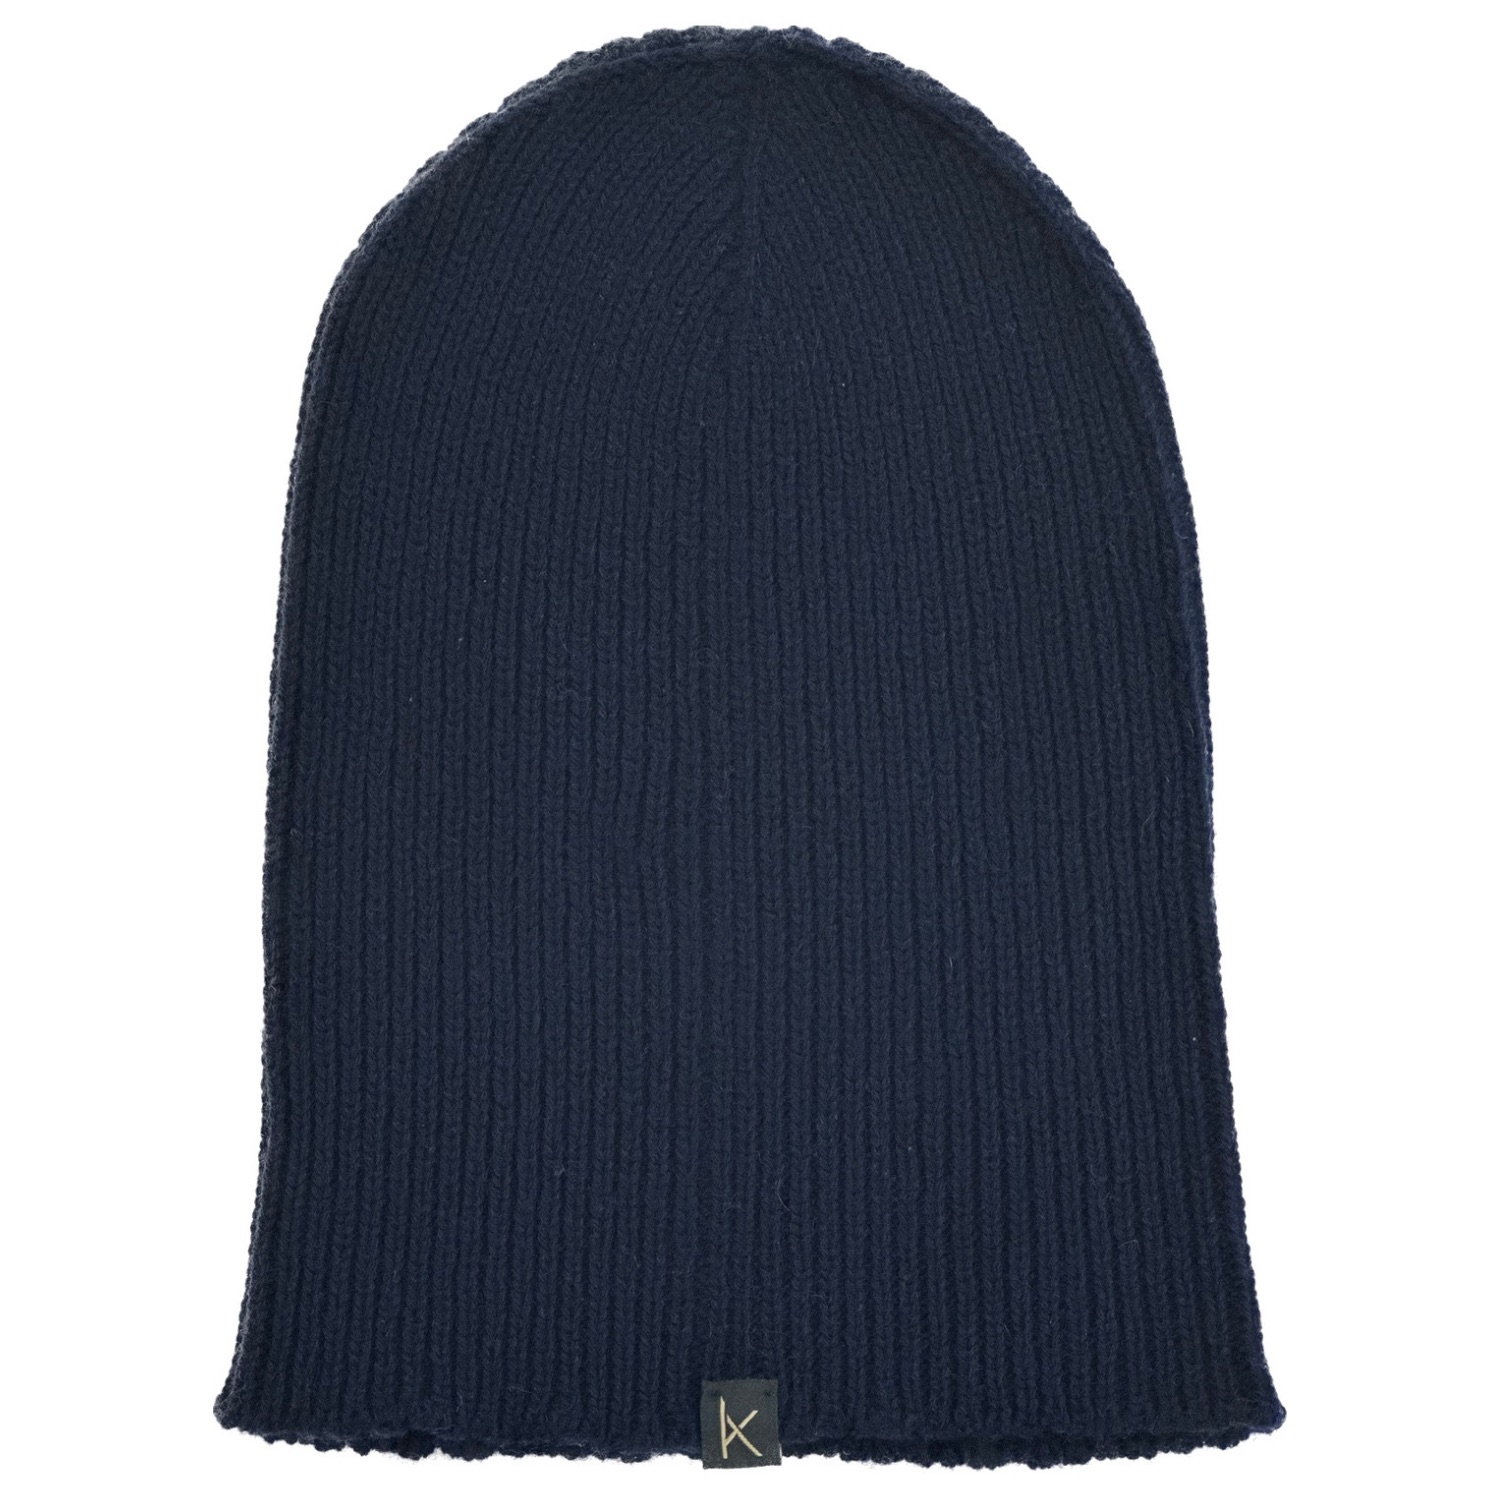 Navy Deluxe Knitted Cashmere Beanie Hat